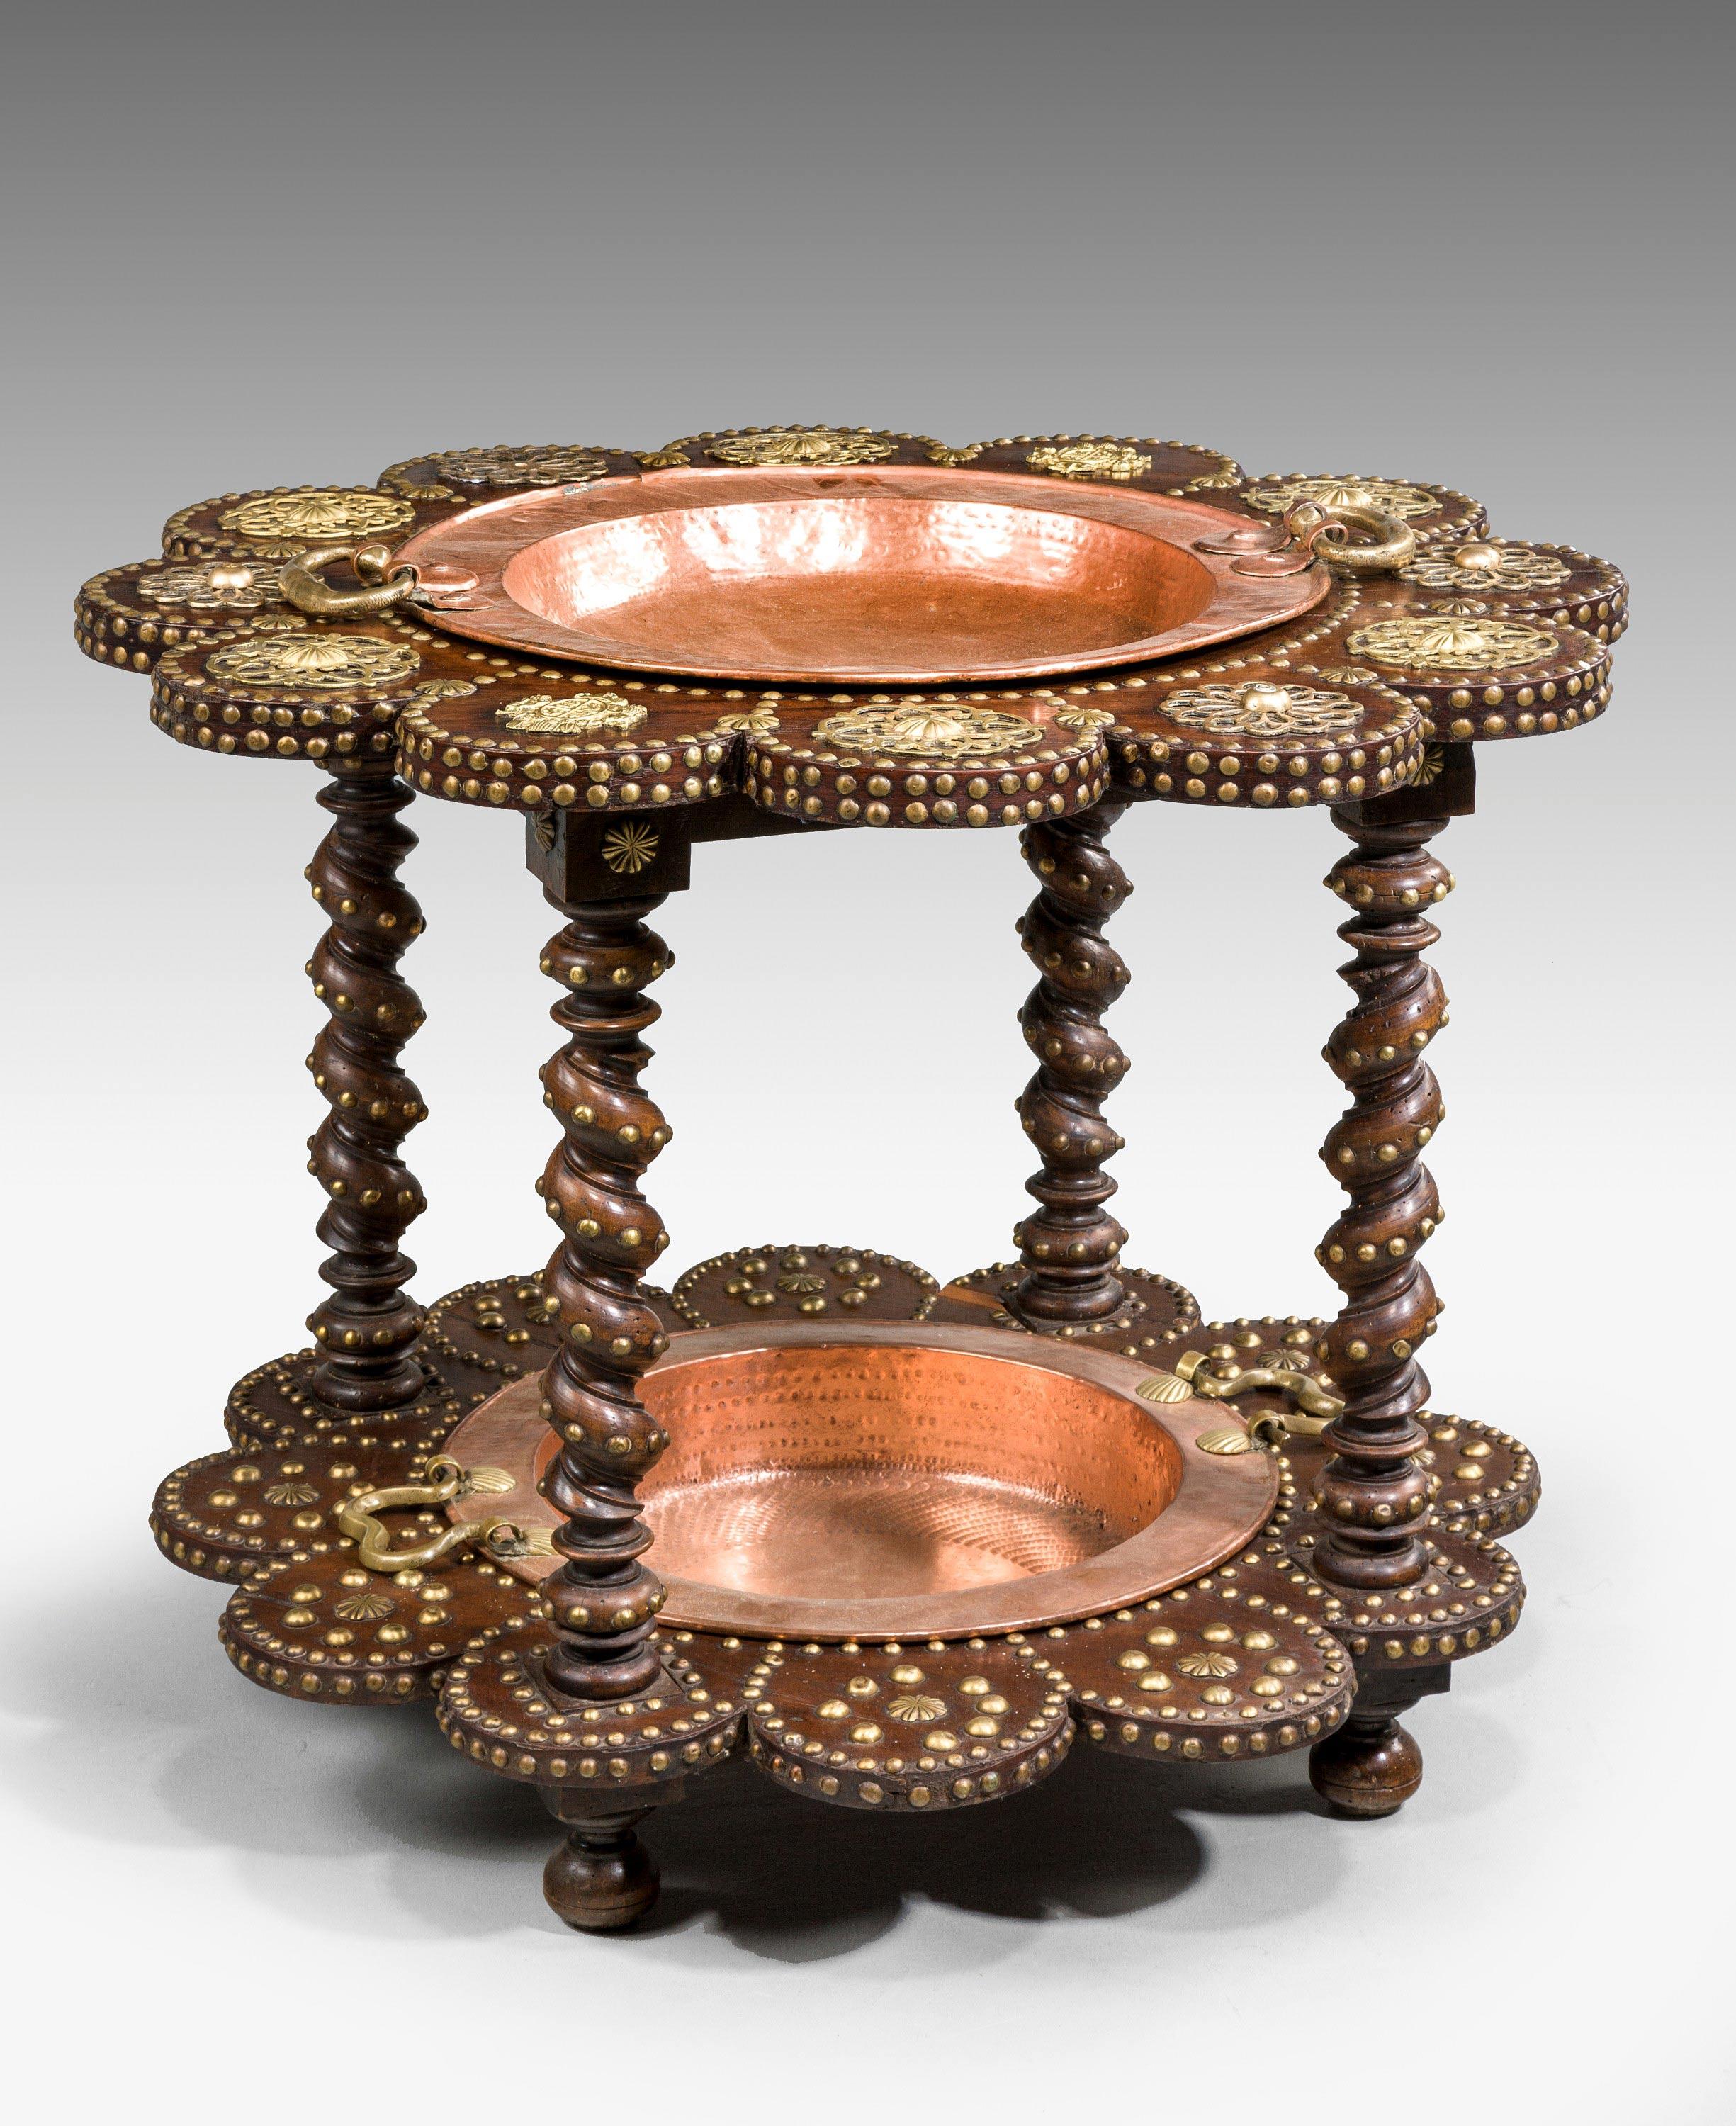 A late 19th century two-tier cooking étagère, elaborately carved and chiseled.